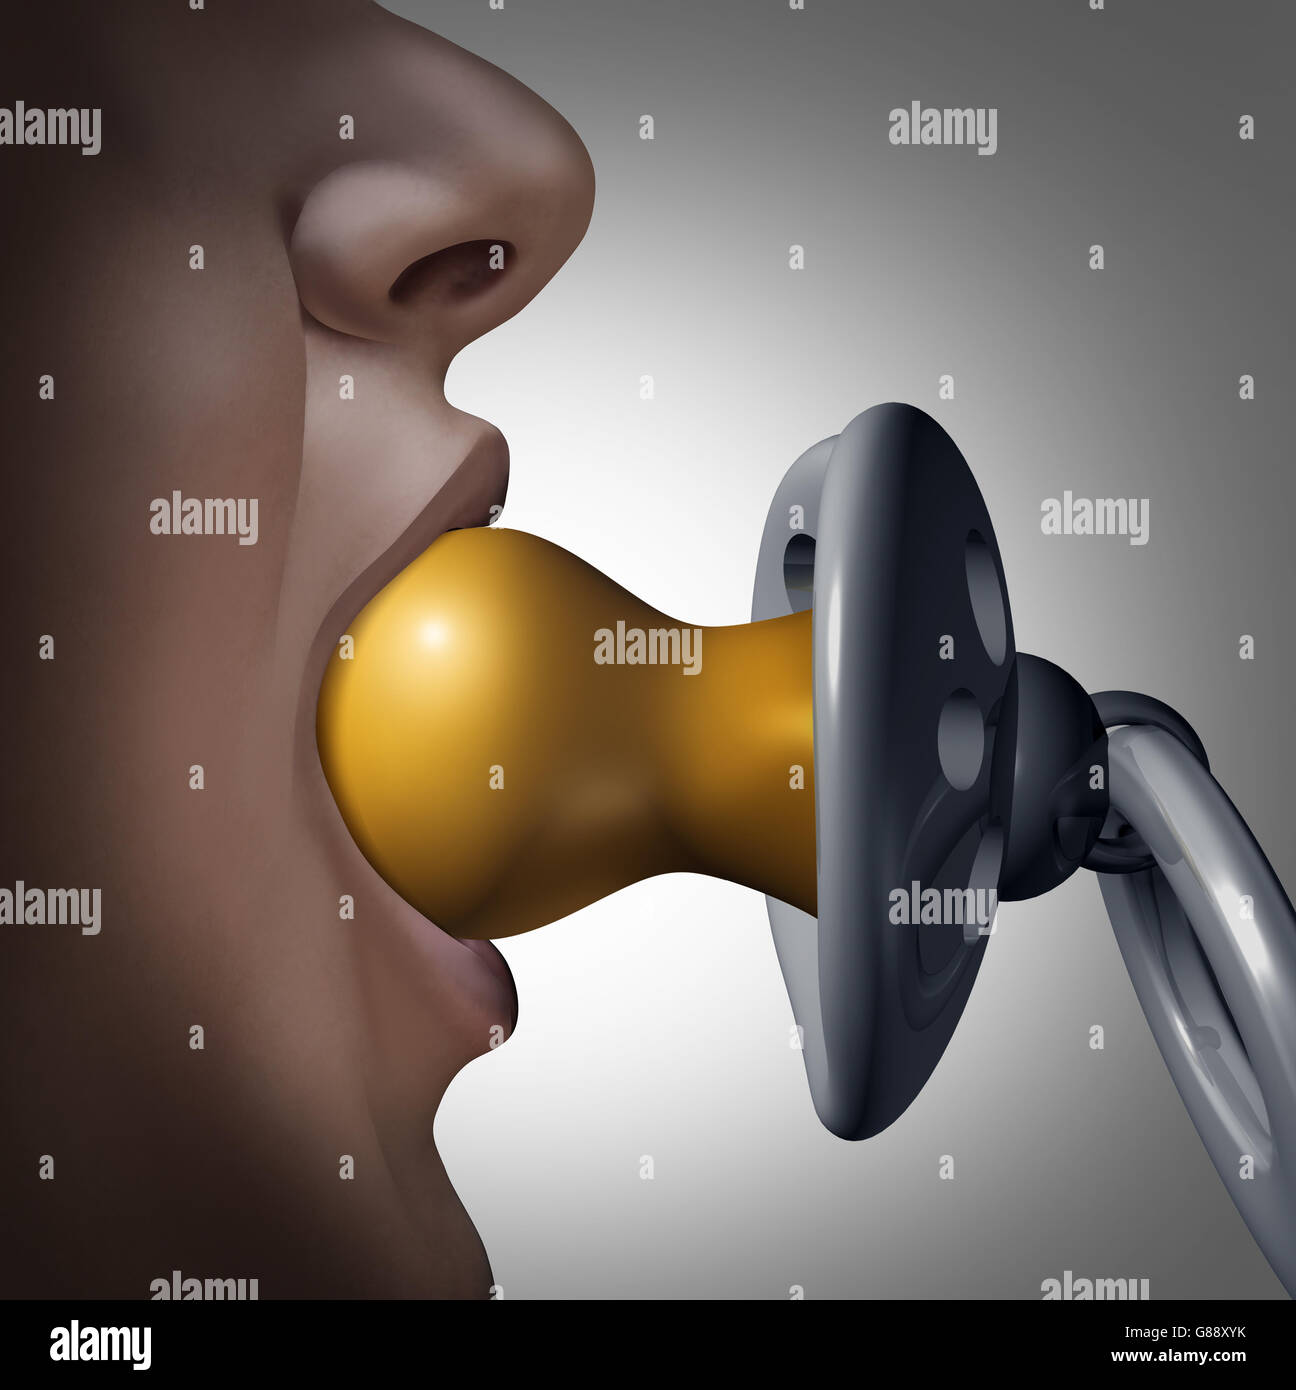 Immaturity concept and childish behavior symbol as a person sucking on a giant baby pacifier as a psychology metaphor for not letting go or calming and managing stress with 3D illustration elements. Stock Photo